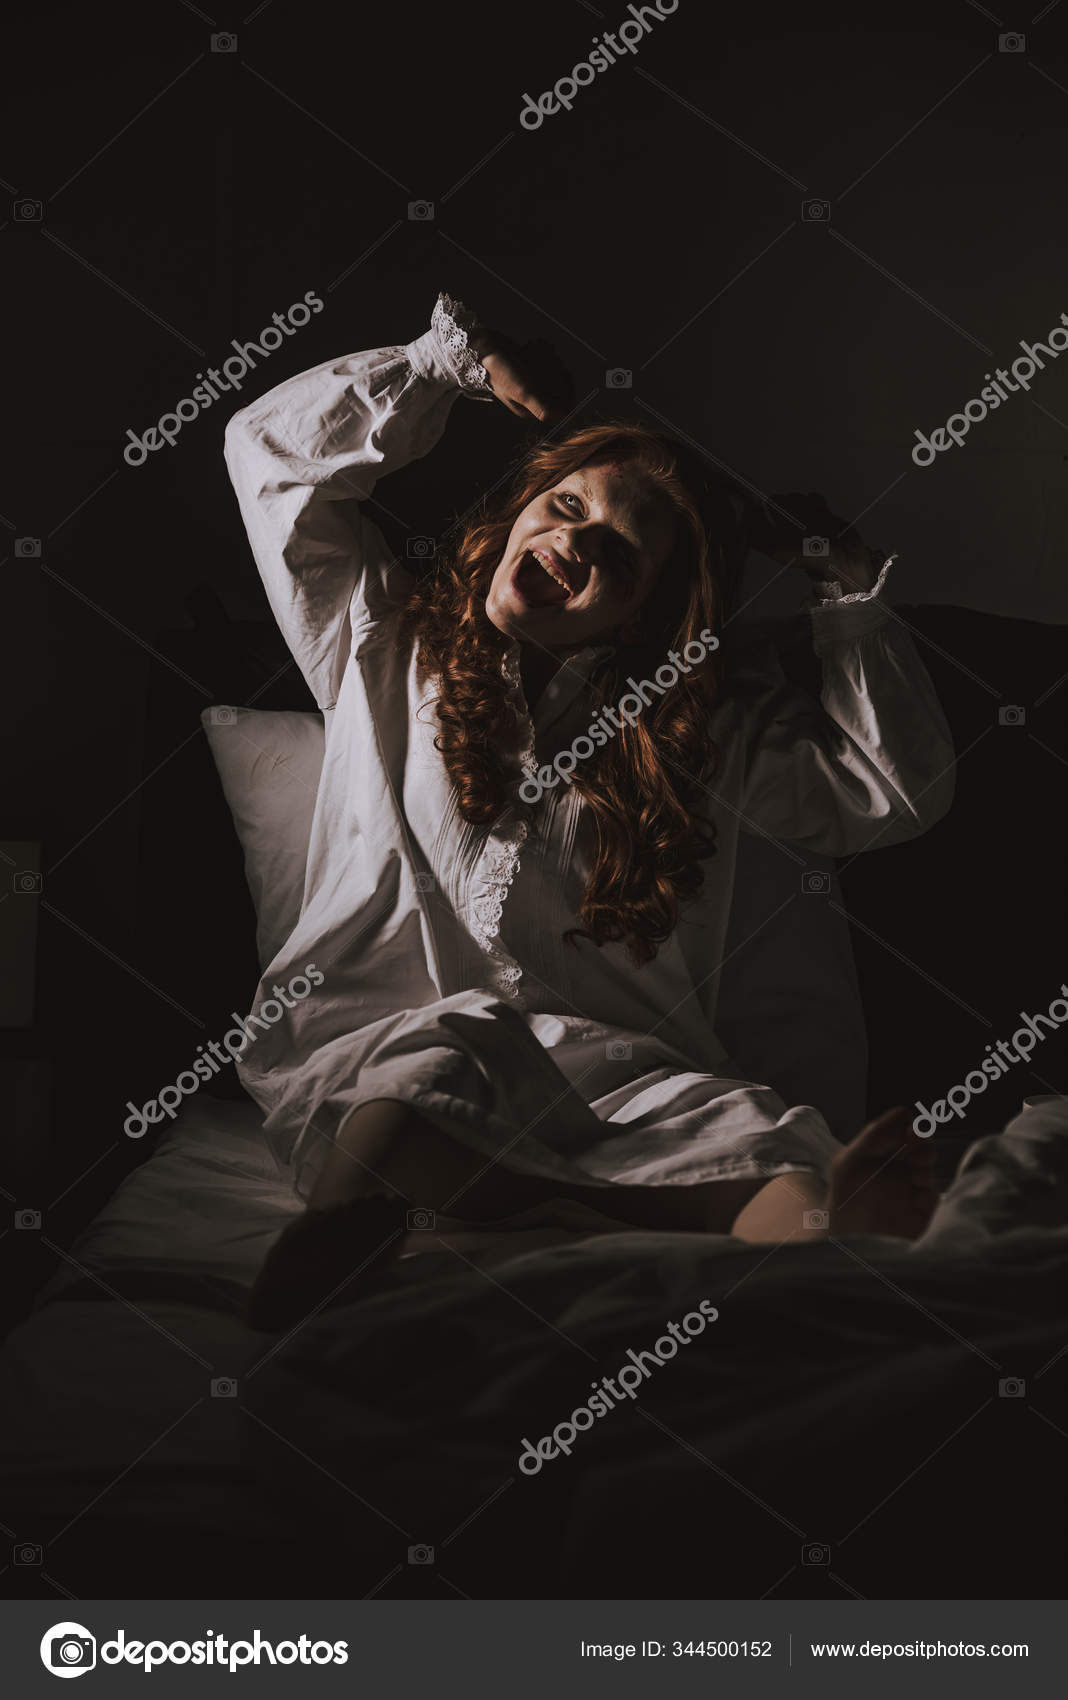 Paranormal Creepy Girl Nightgown Shouting Bed Stock Photo by ...